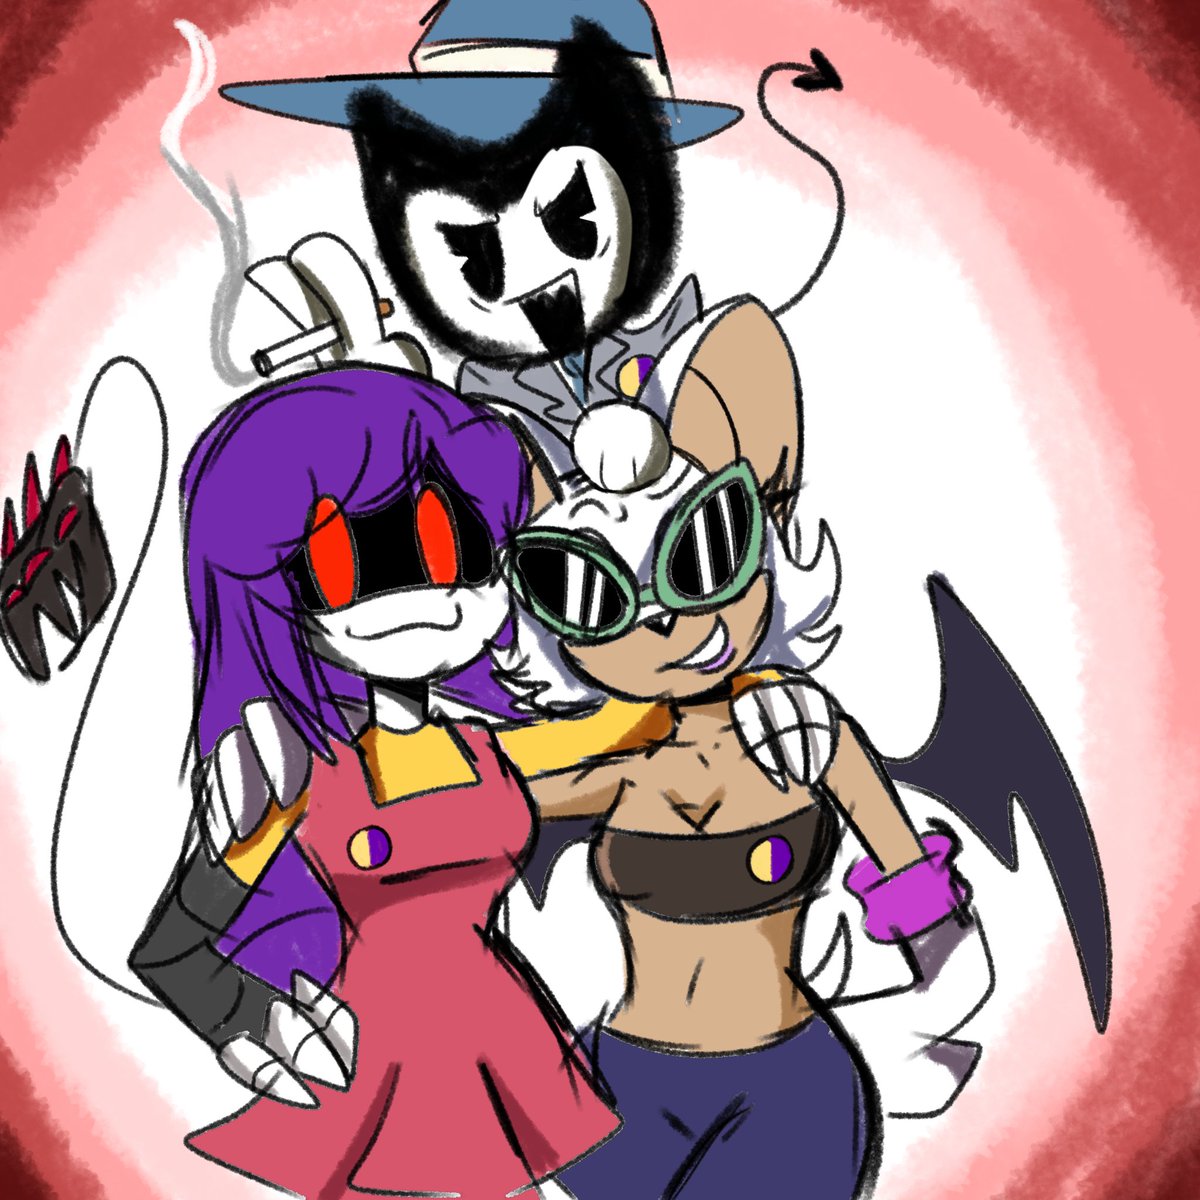 My and my Two besties sonas together^w^ #murderdrones #Bendy_and_the_ink_machine #SonicTheHedgehog @BaendiWuz64 @MileonMillie